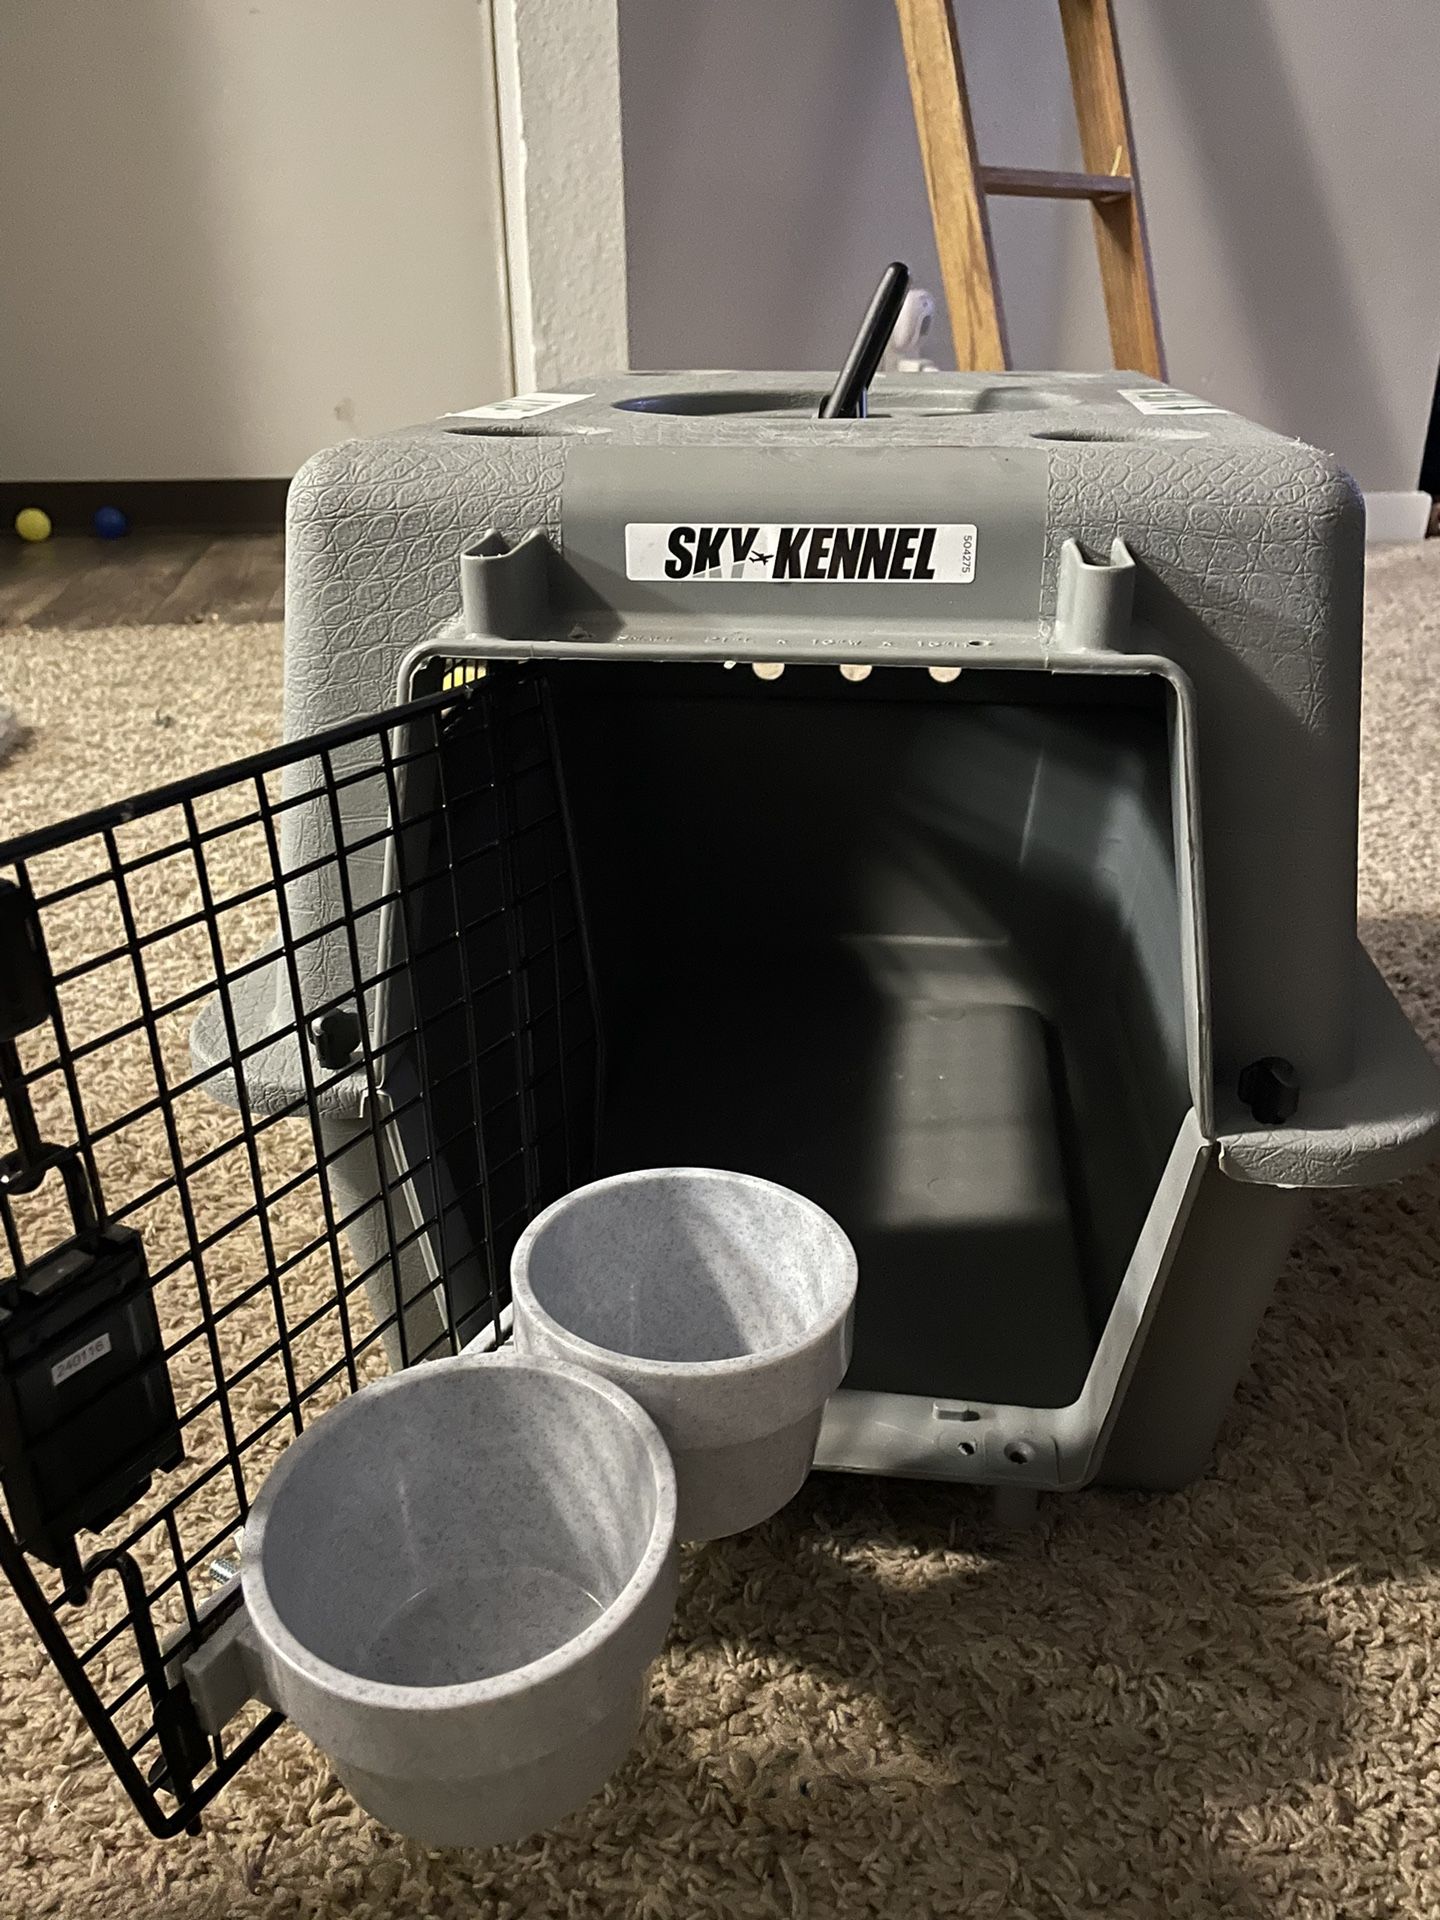 Small Animal Crate